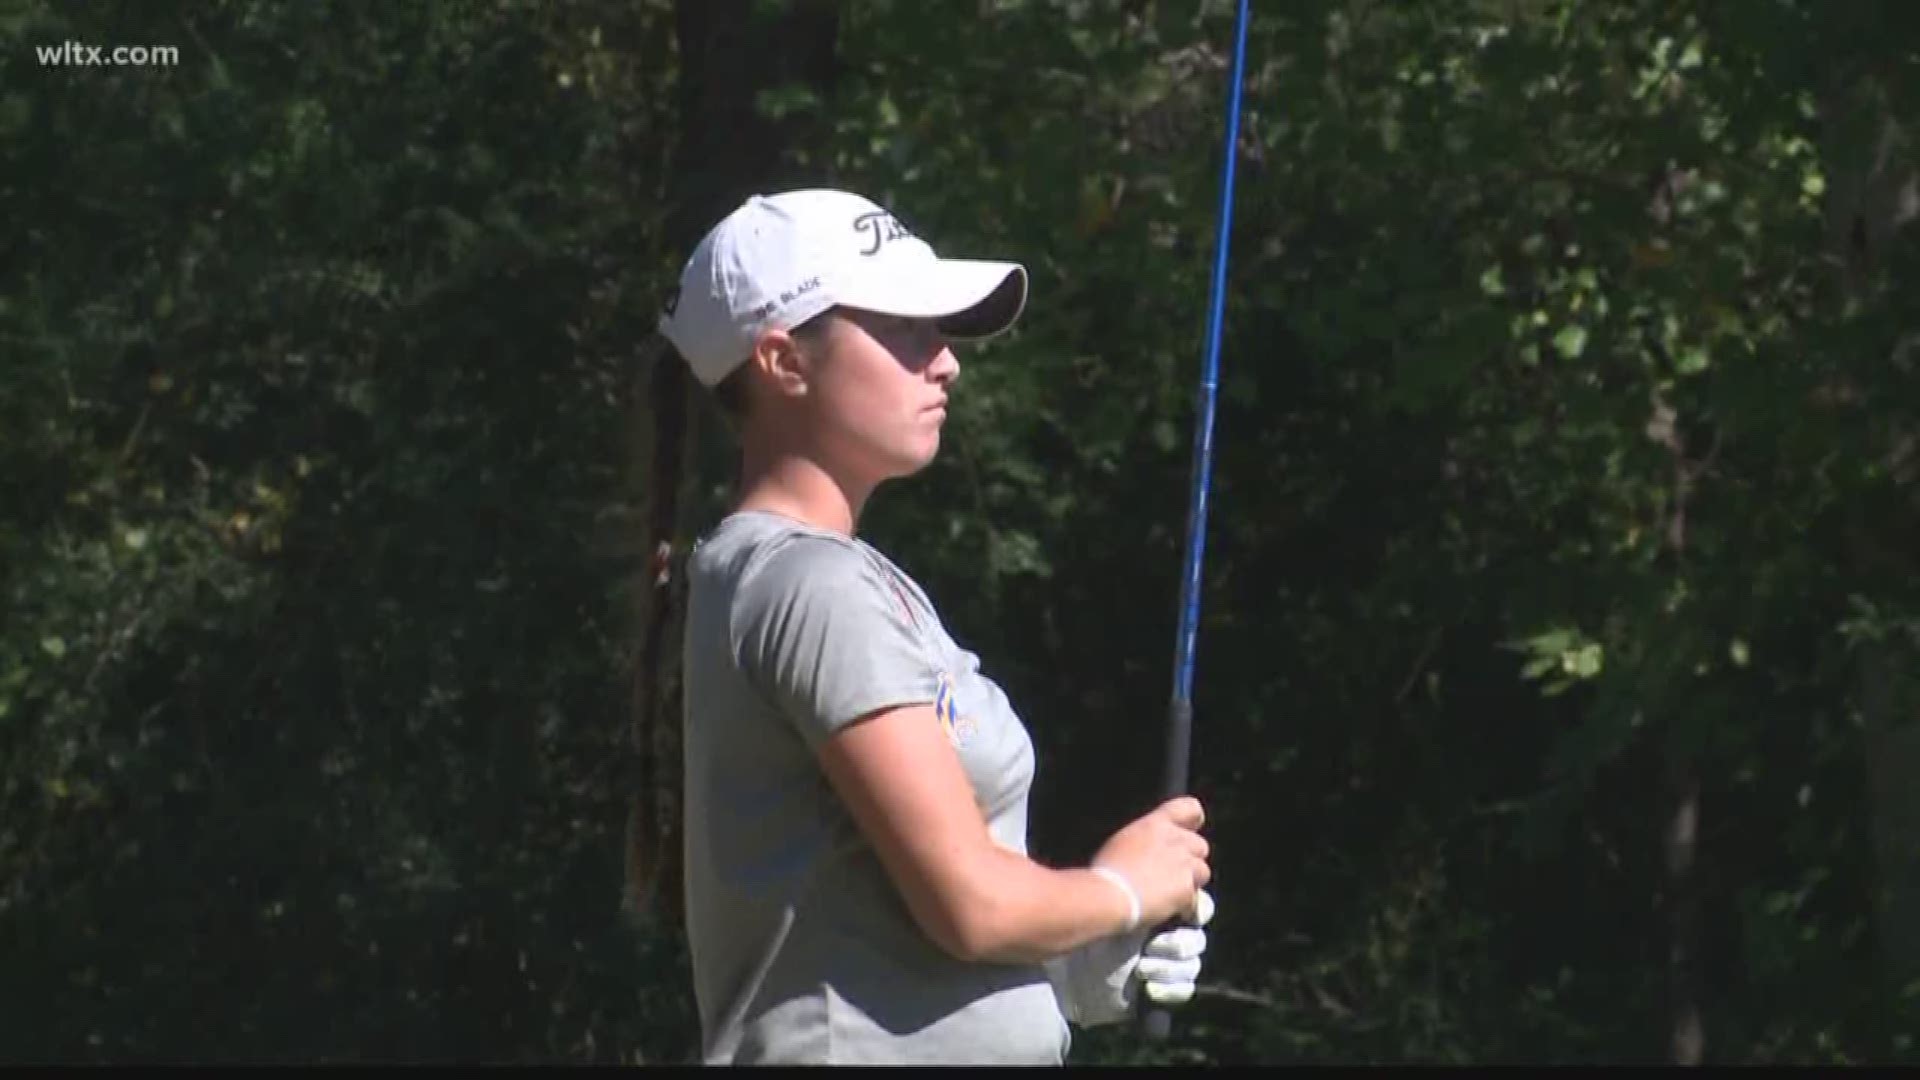 The top-ranked senior golfer in the Palmetto State, Gracyn Burgess has signed to play at Clemson.